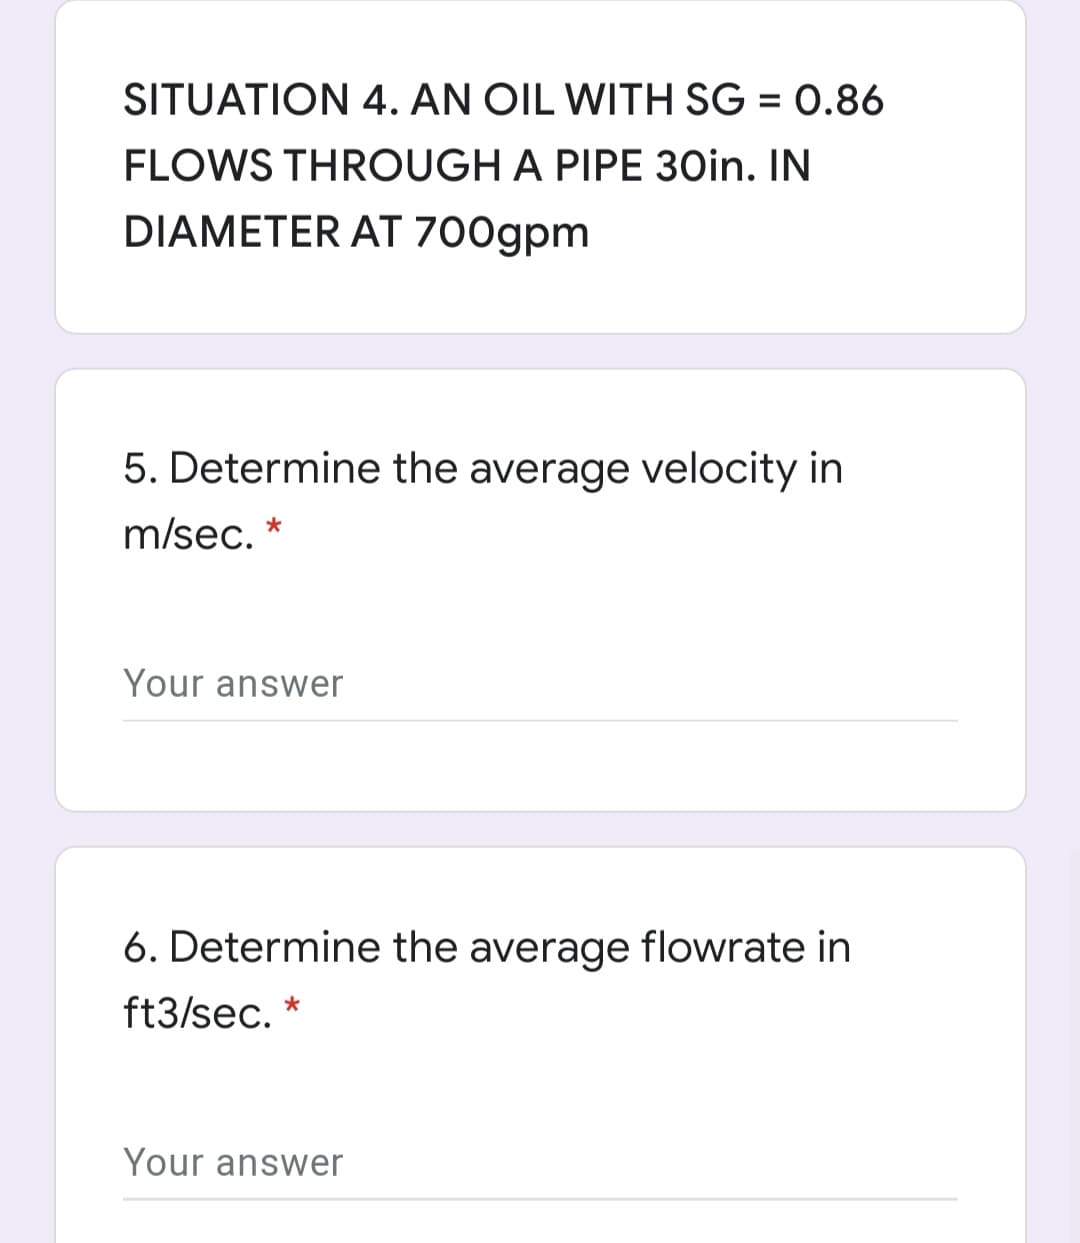 SITUATION 4. AN OIL WITH SG = 0.86
FLOWS THROUGH A PIPE 30in. IN
DIAMETER AT 700gpm
5. Determine the average velocity in
m/sec.
Your answer
6. Determine the average flowrate in
ft3/sec.
Your answer
